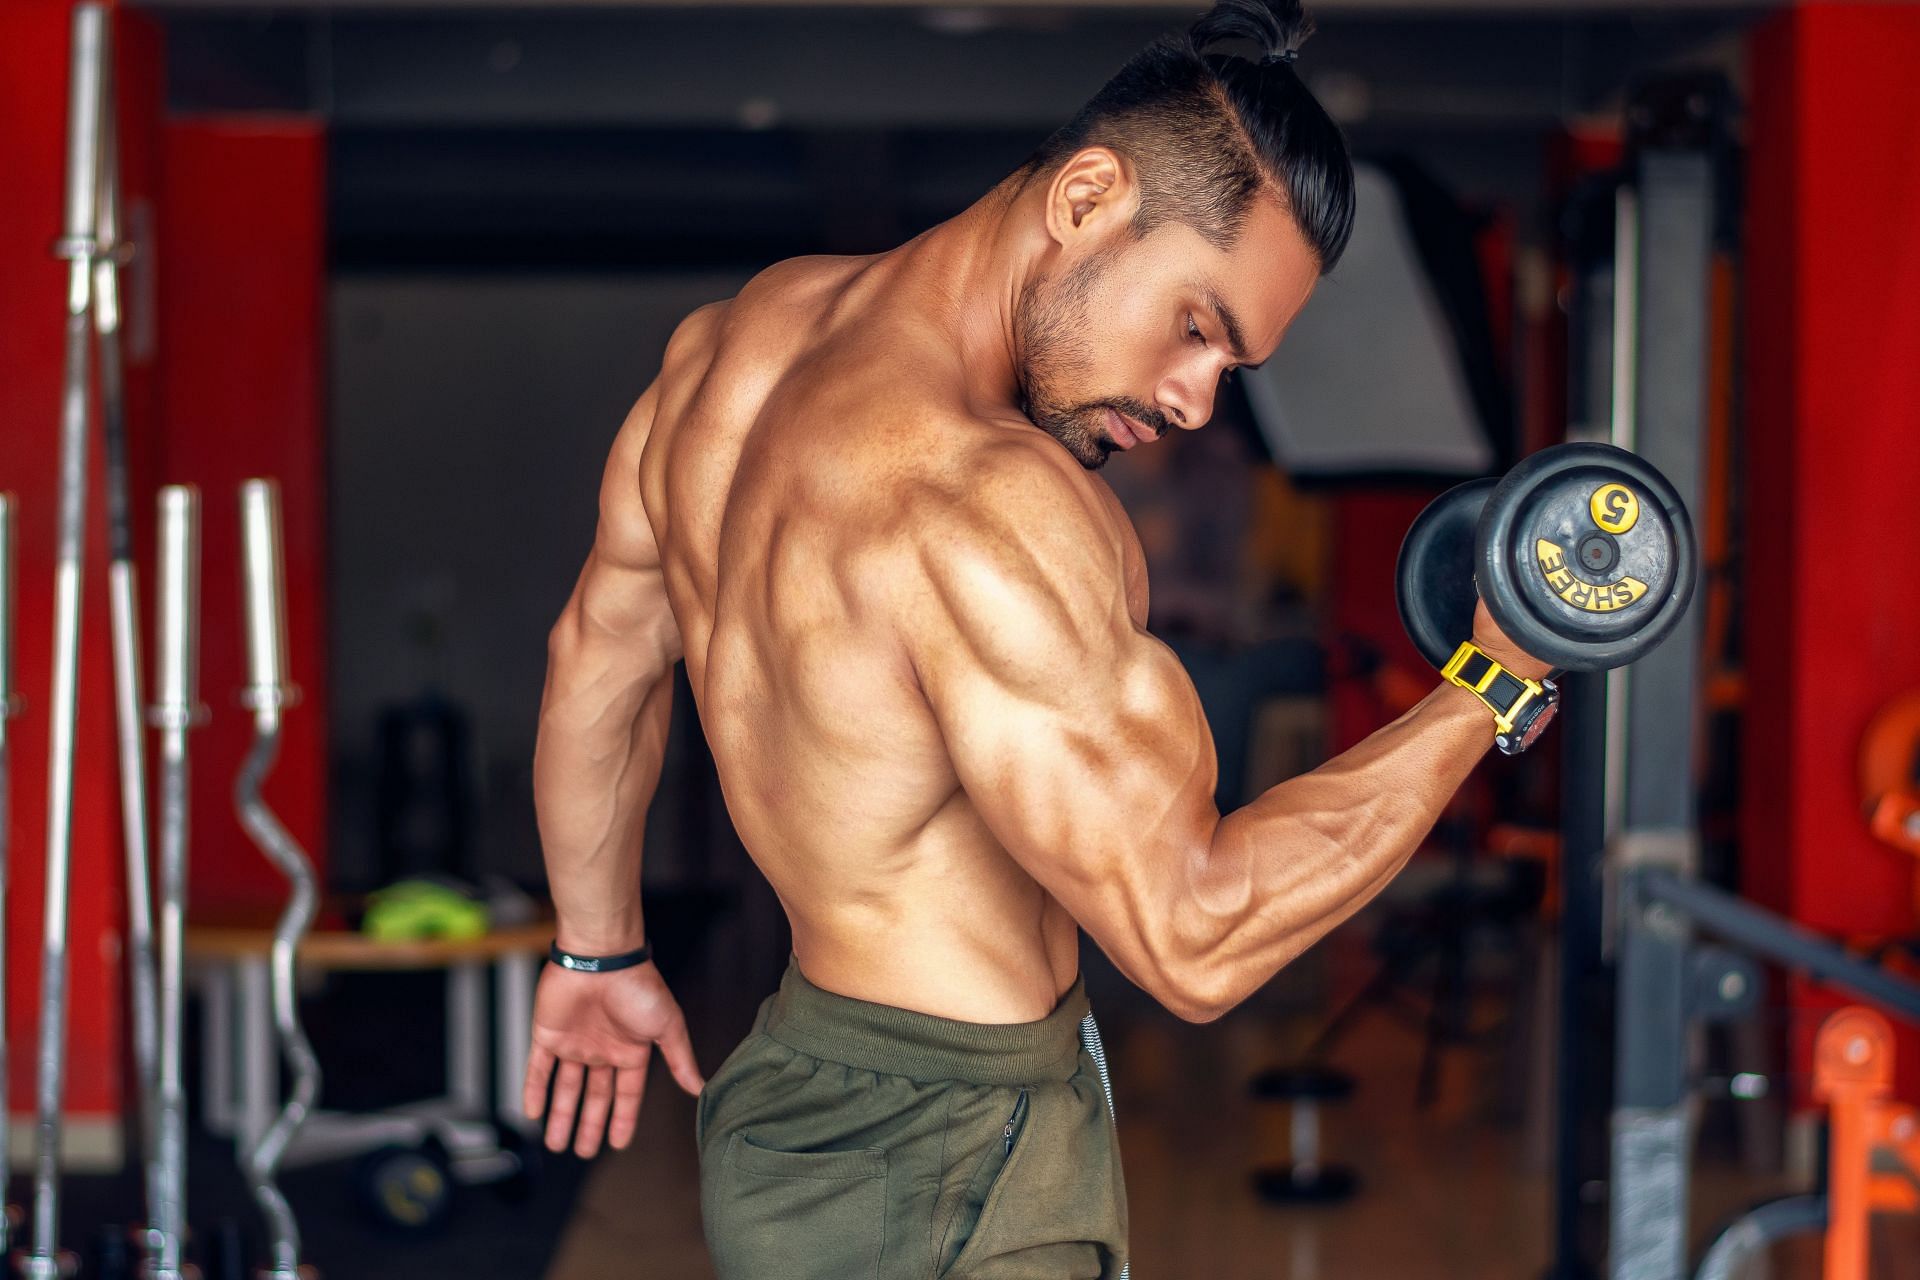 Want to work on your shoulders? Try these five middle delt exercises. (Image via Pexels / Avinash Salunke)